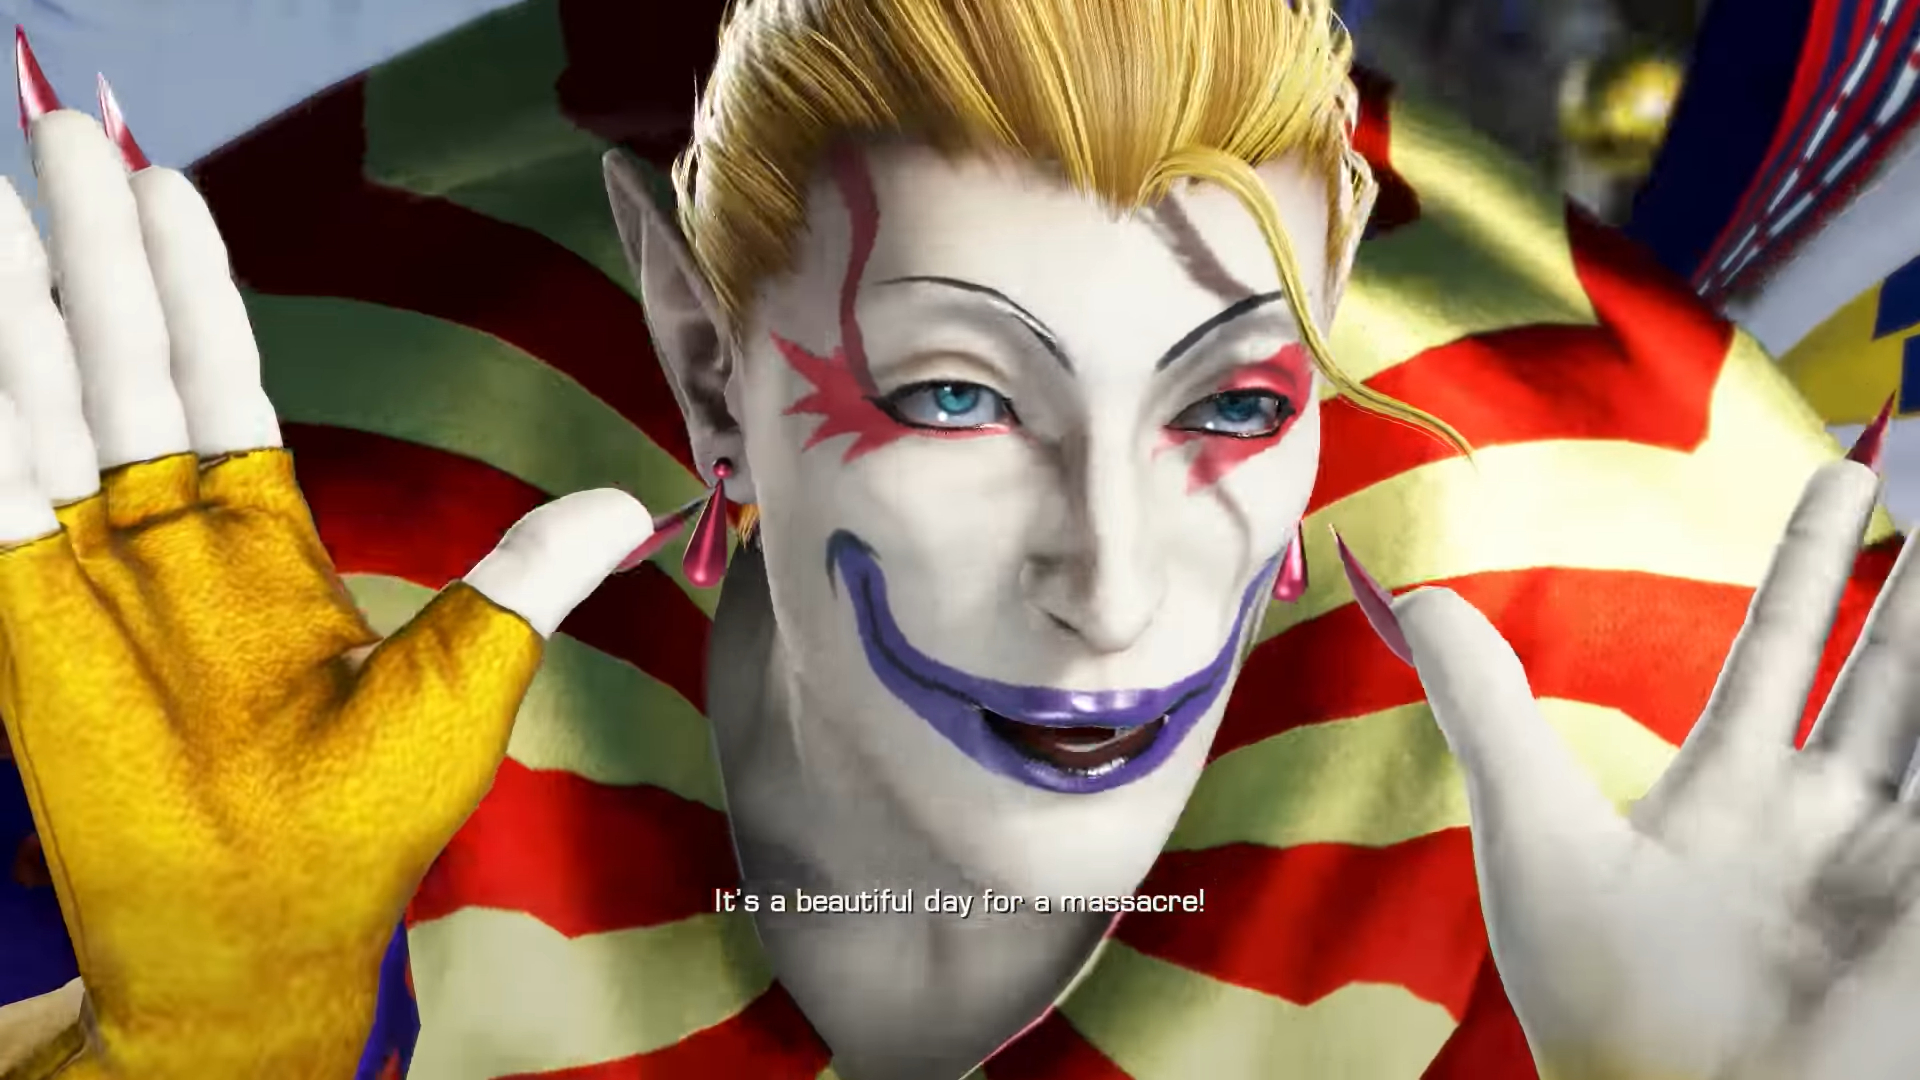 Kefka being a complete lunatic.